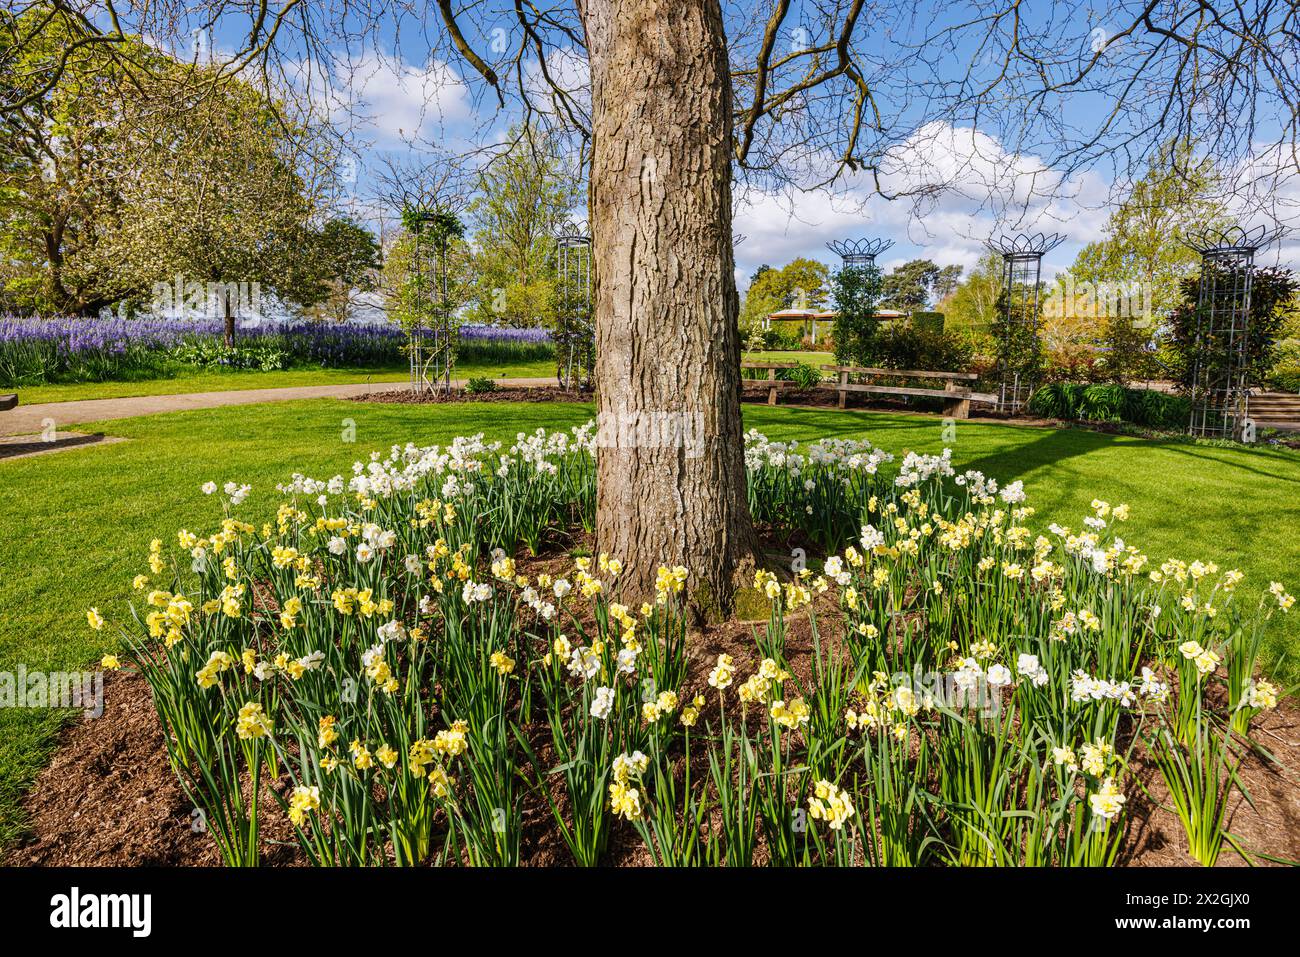 Narcissus 'Yellow Cheerfulness' and white 'Cheerfulness' flowering around the base of a tree, RHS Garden, Wisley, Surrey, south-east England in spring Stock Photo